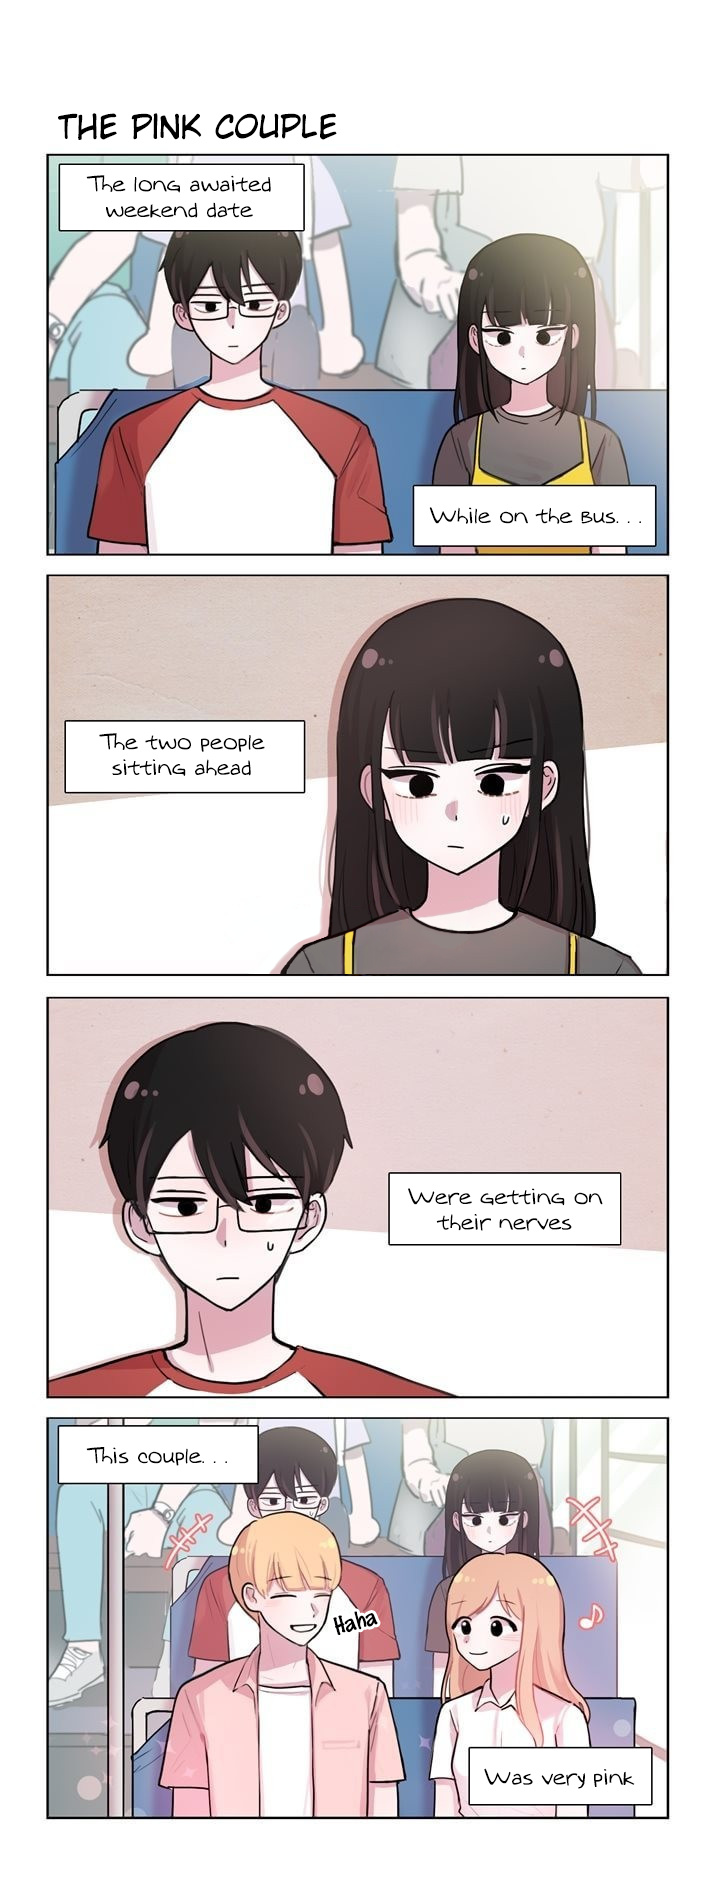 She Hates Me Vol.1 Chapter 88: The Pink Couple - Picture 2